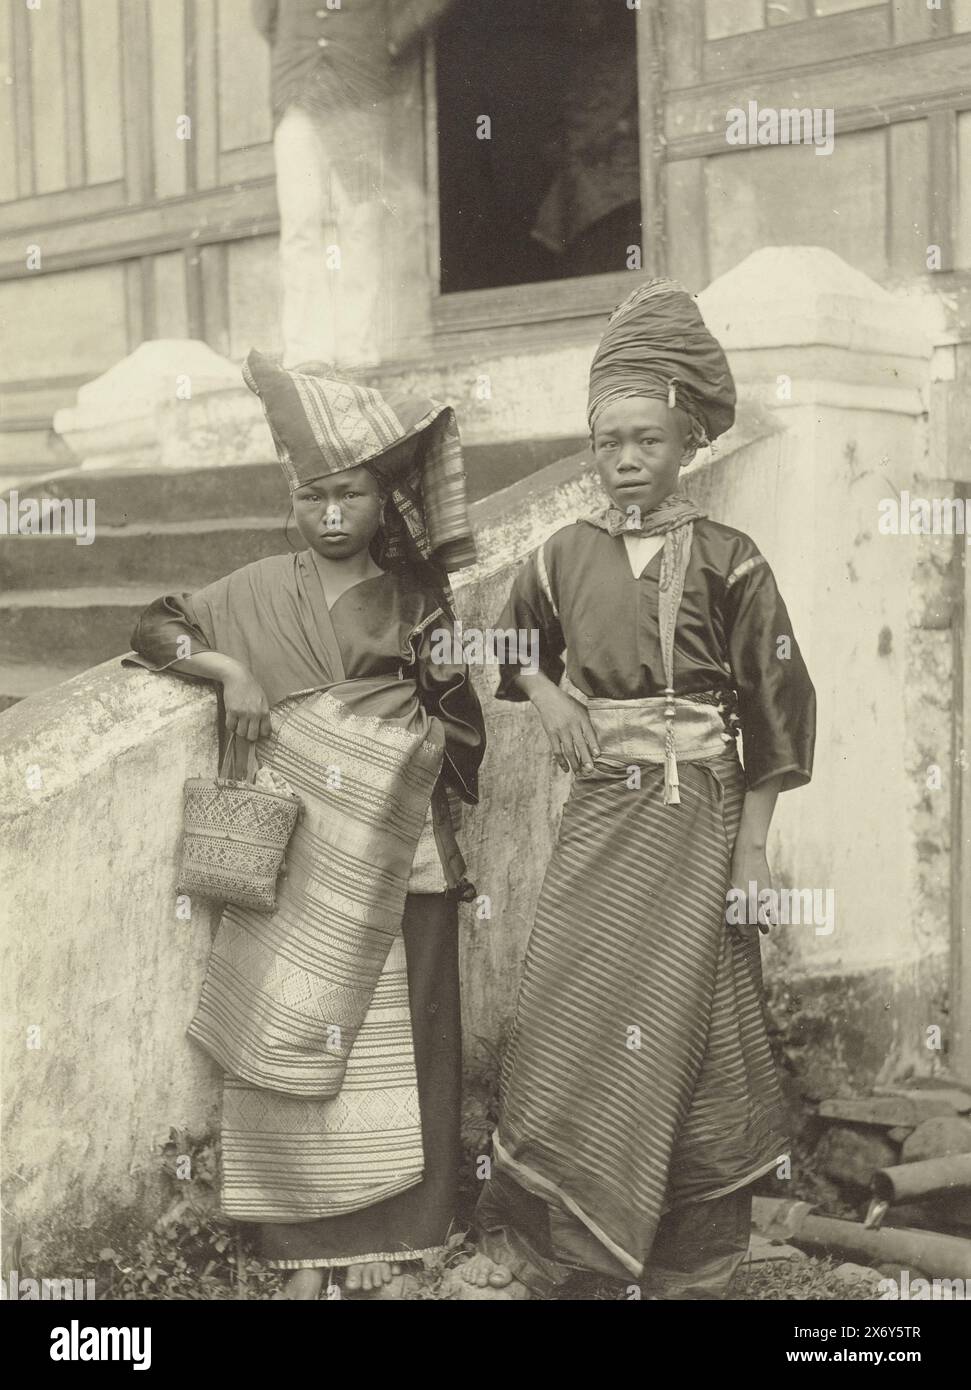 Portrait of an unknown Minangkabau boy and girl in traditional clothing in Batipuh, Batipoeh (title on object), A Minangkabau boy and girl in traditional clothing with hair cloths and thick woven sarongs., photograph, Christiaan Benjamin Nieuwenhuis, (mentioned on object), Batipuh, 1891 - 1912, baryta paper, height, 285 mm × width, 196 mm Stock Photo